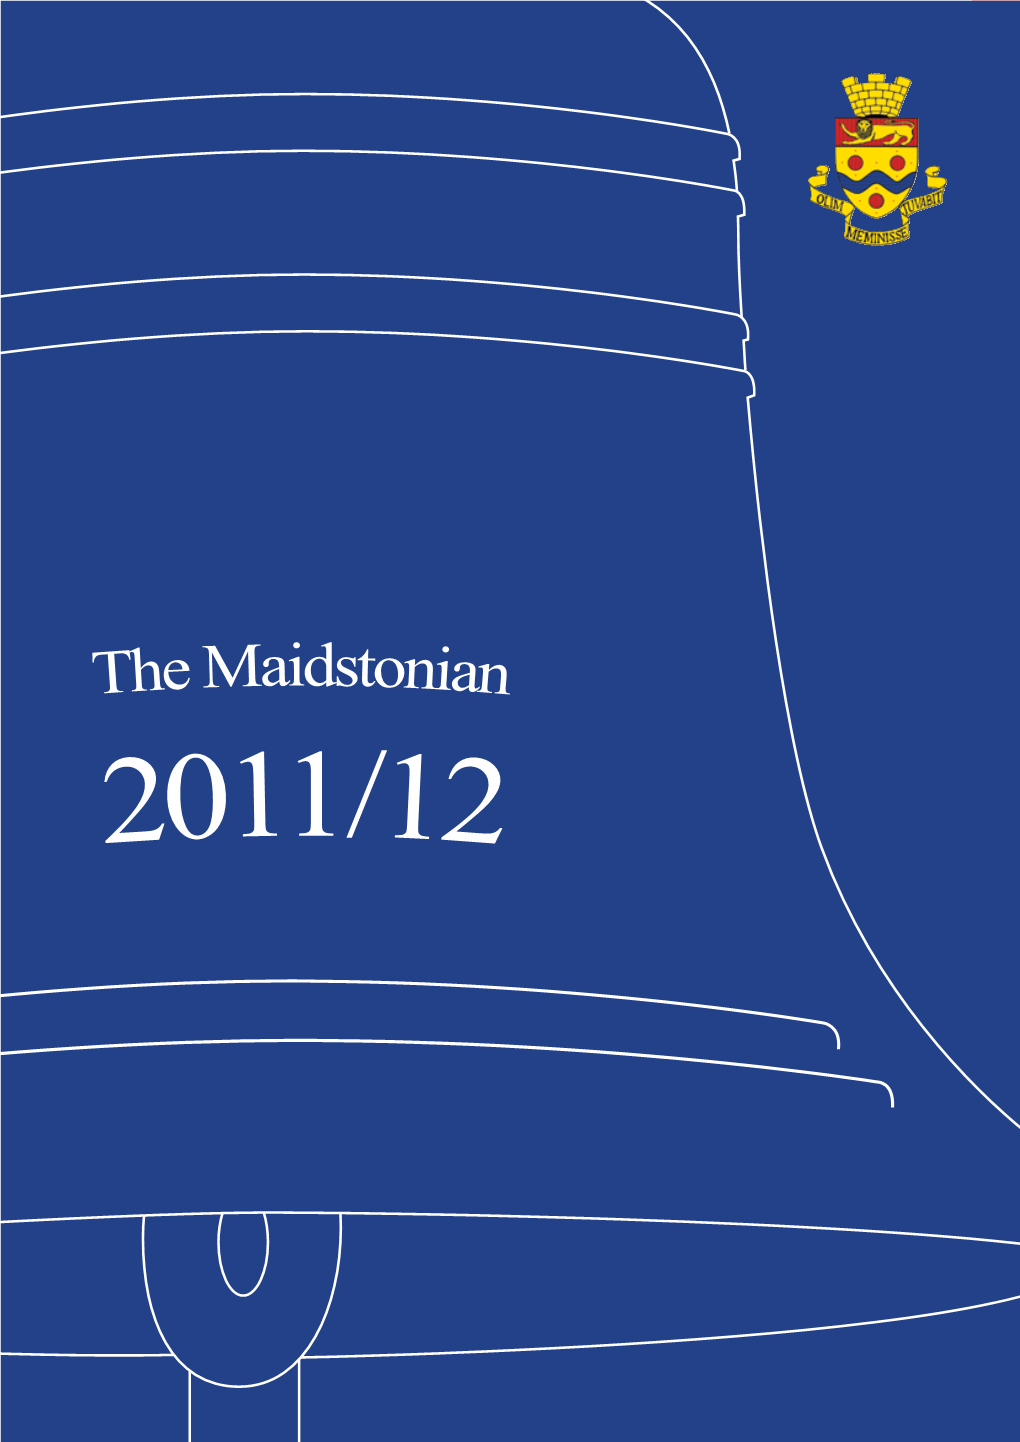 The Maidstonian 2011/12